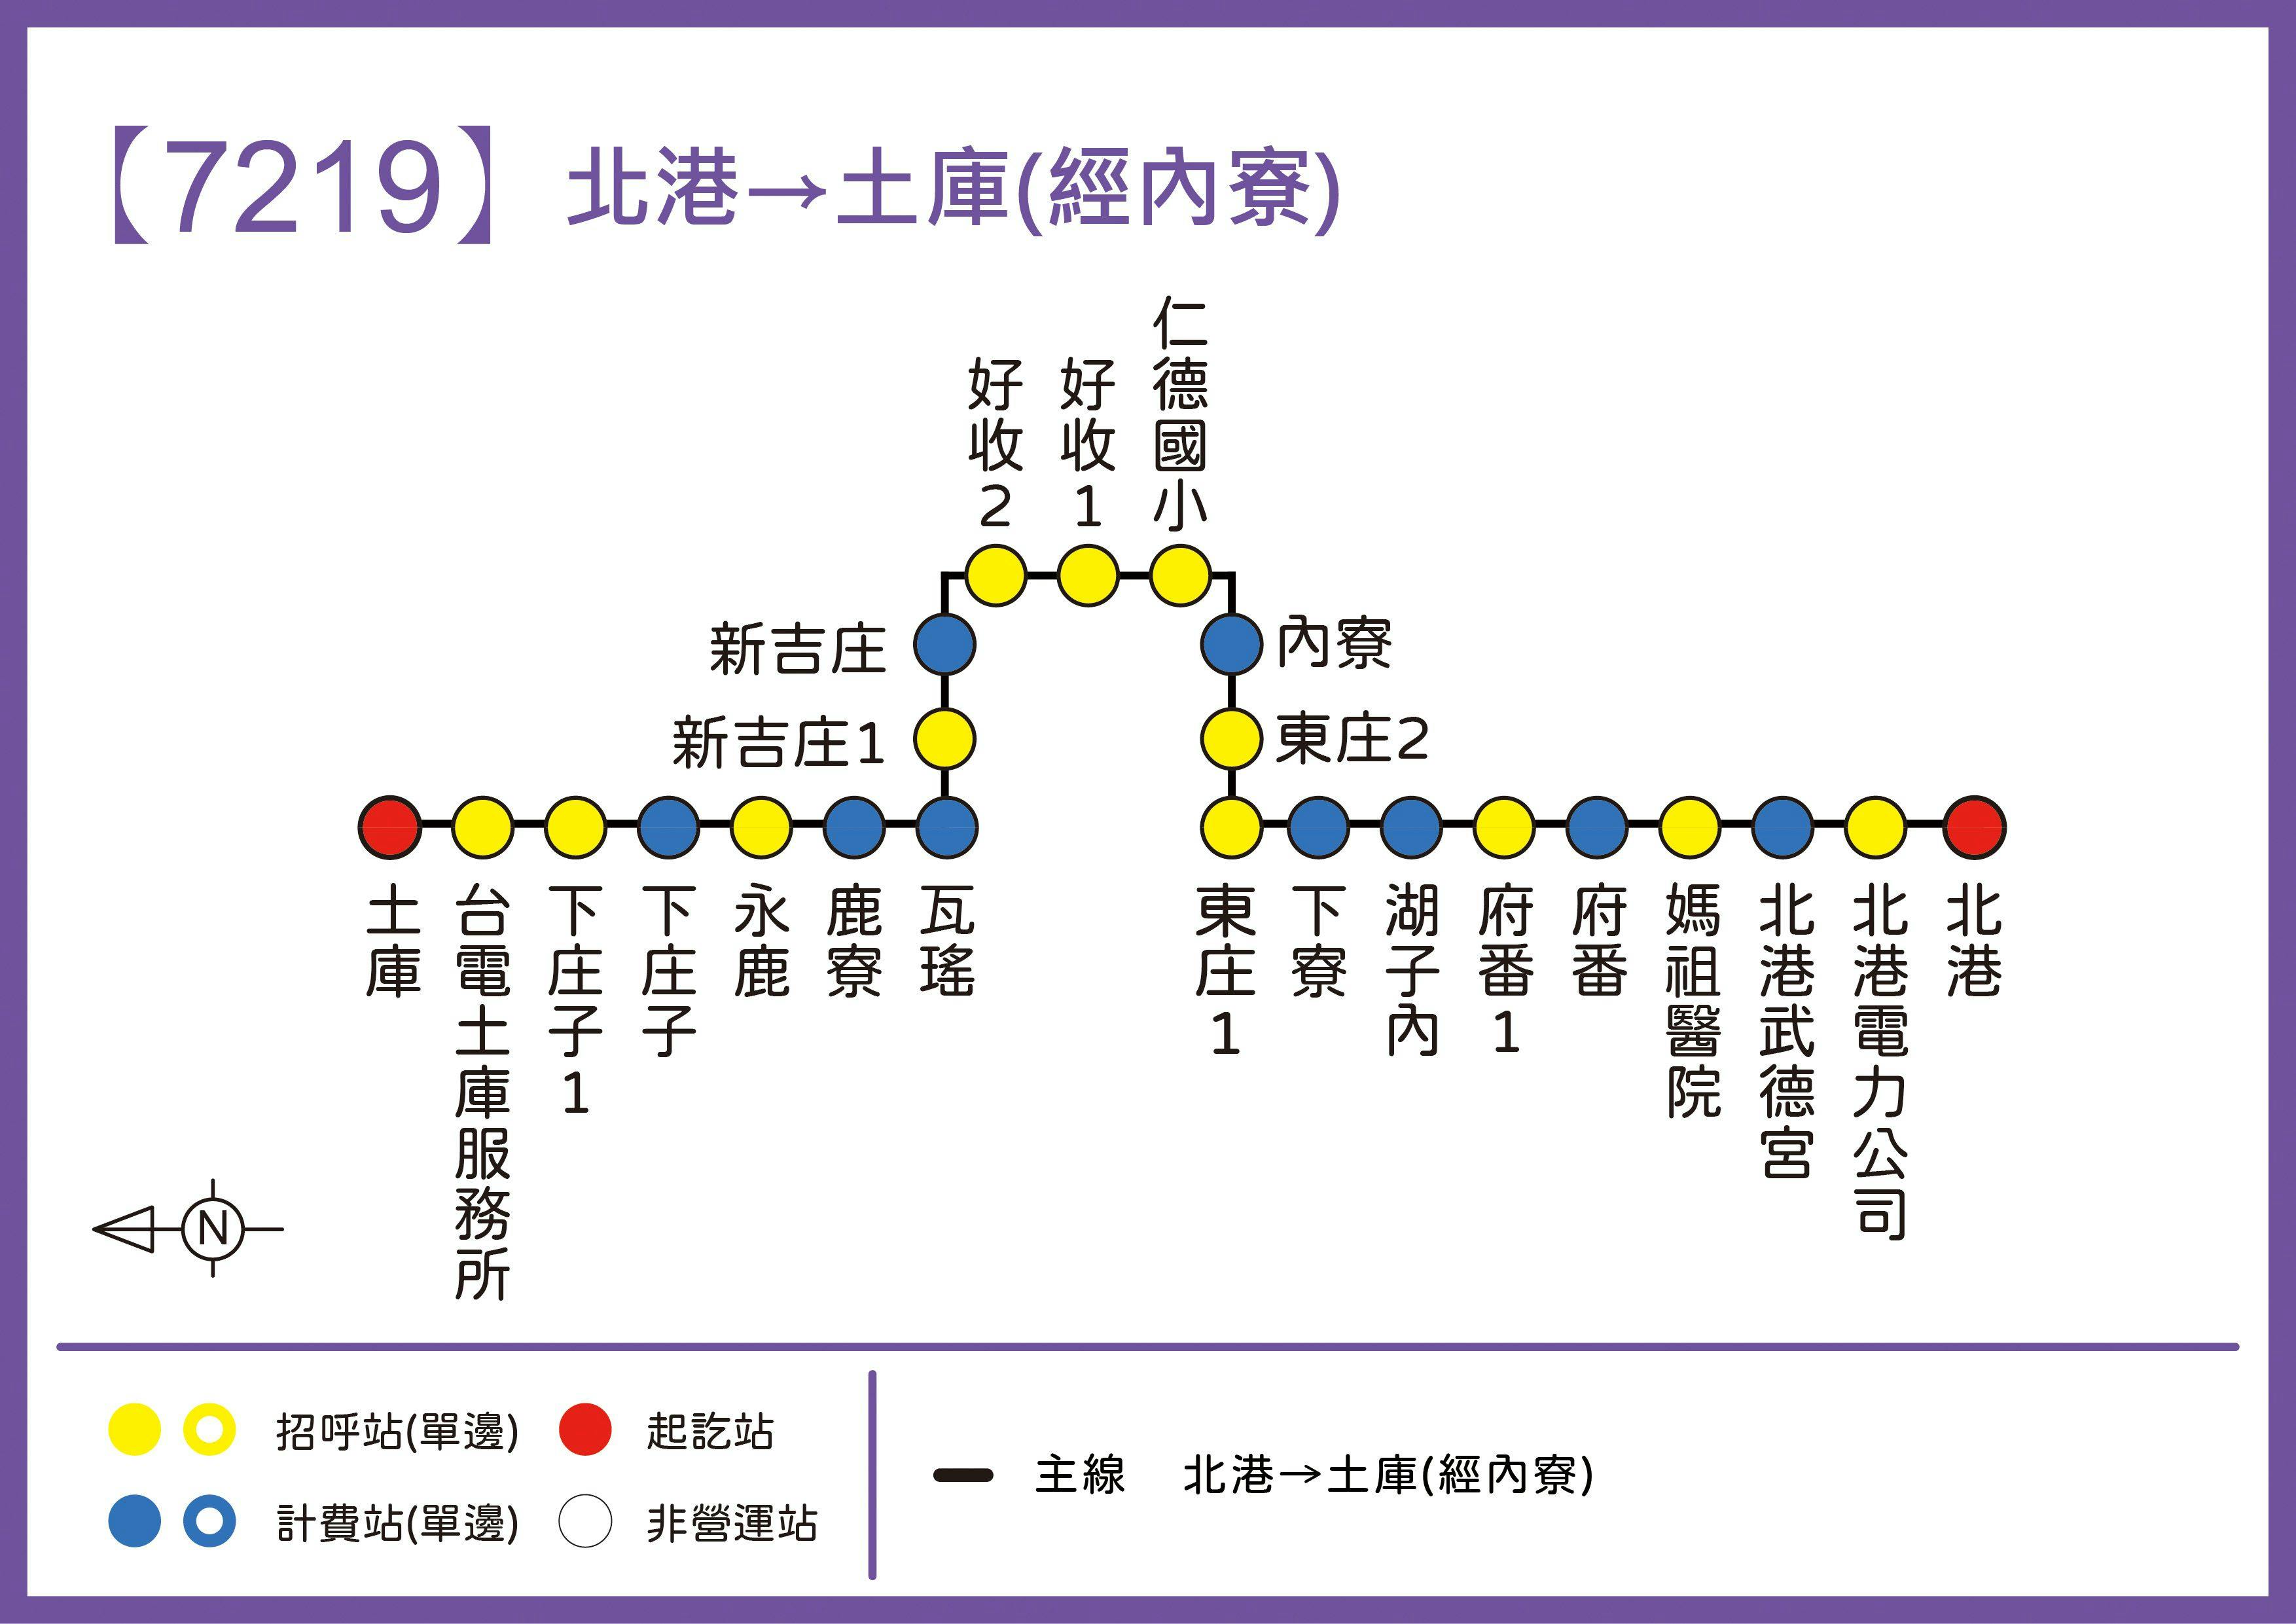 7219Route Map-Chiayi Bus